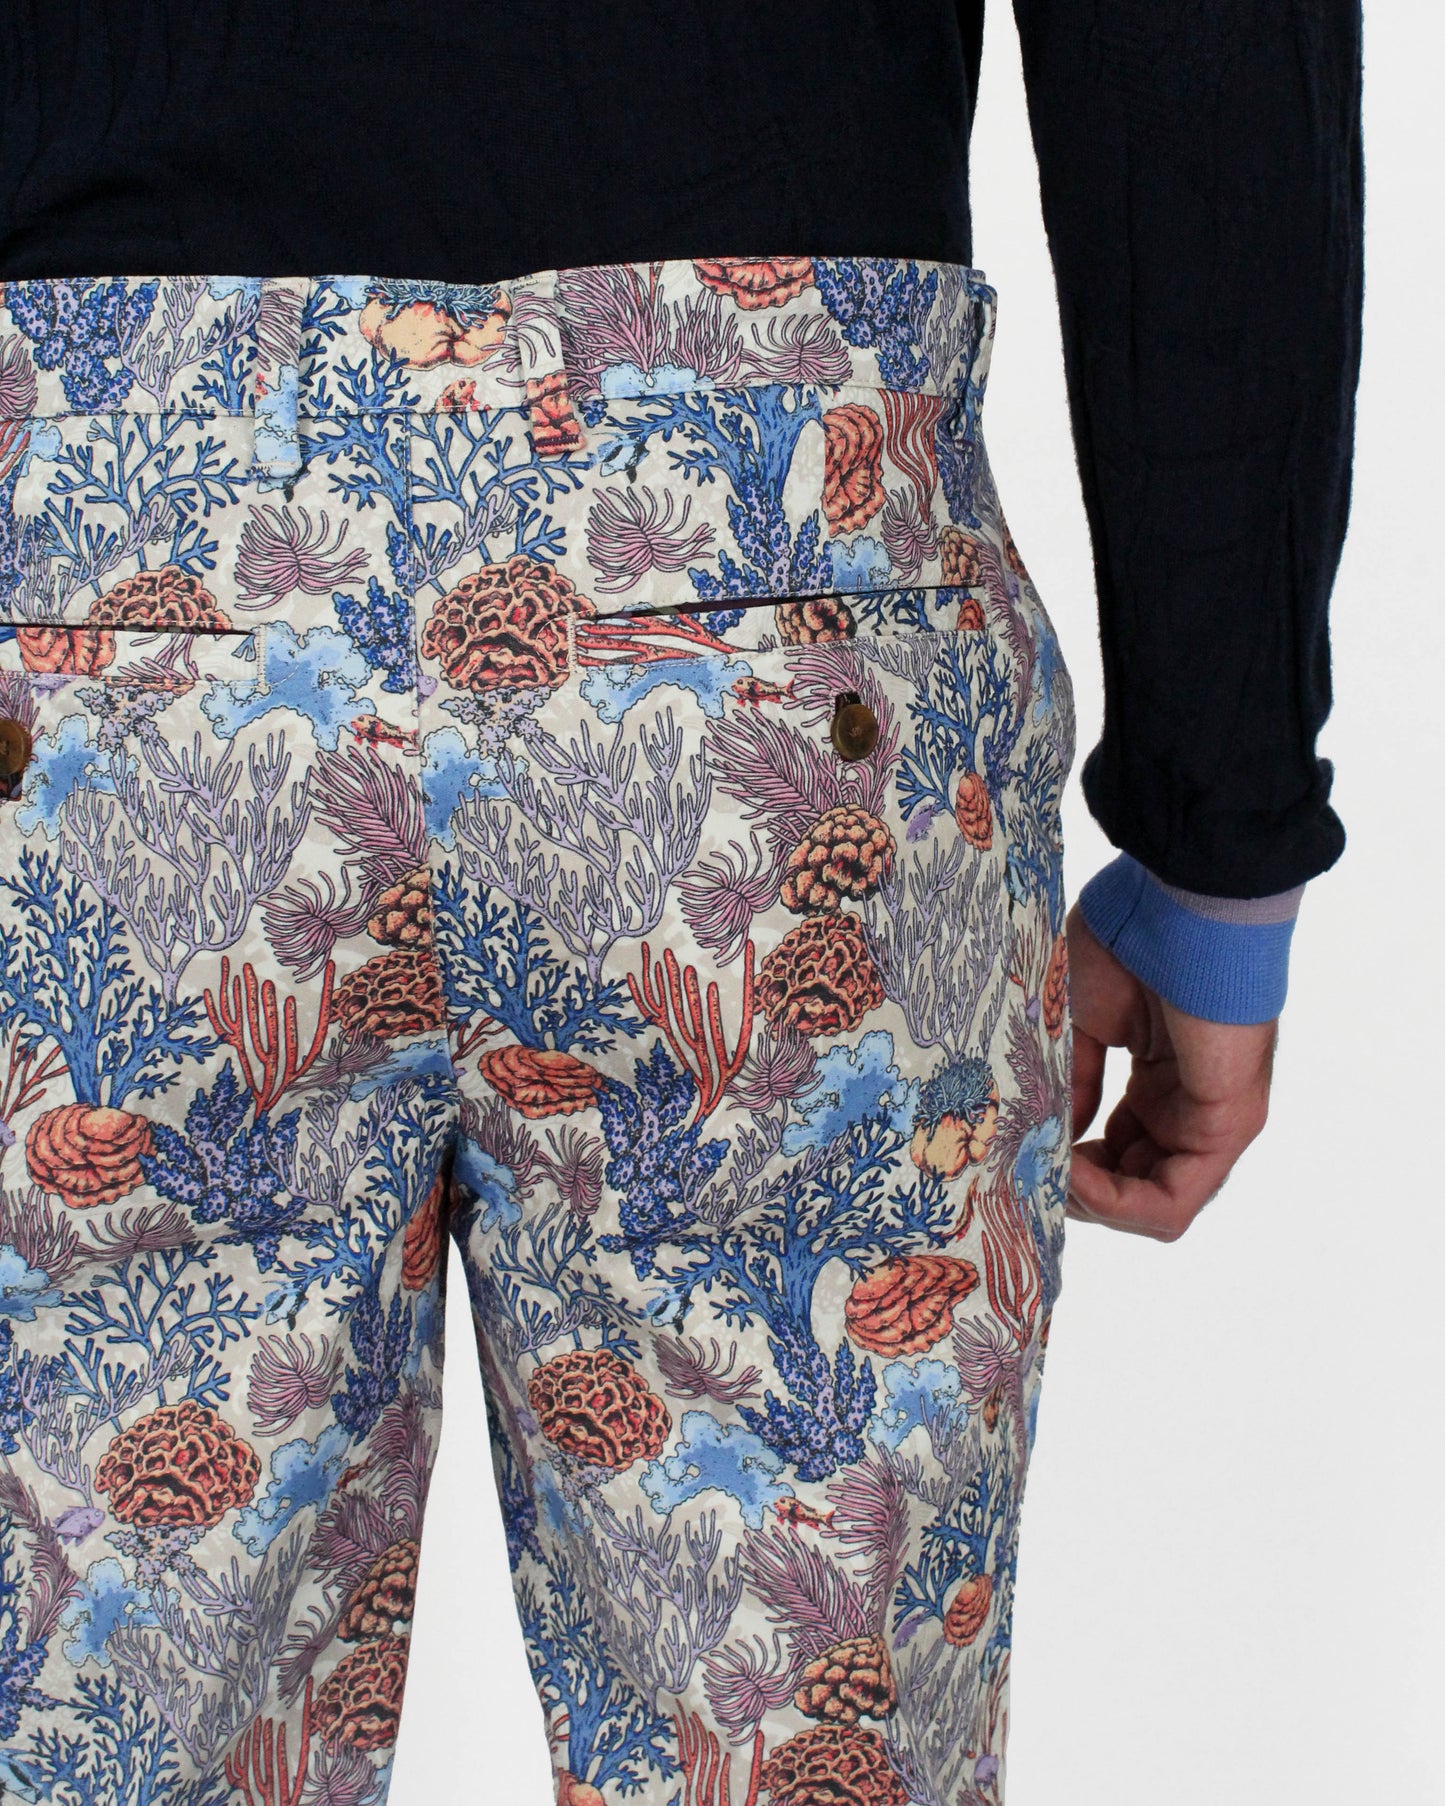 JACK LUX CORAL GARDEN PANTS IN PUMICE